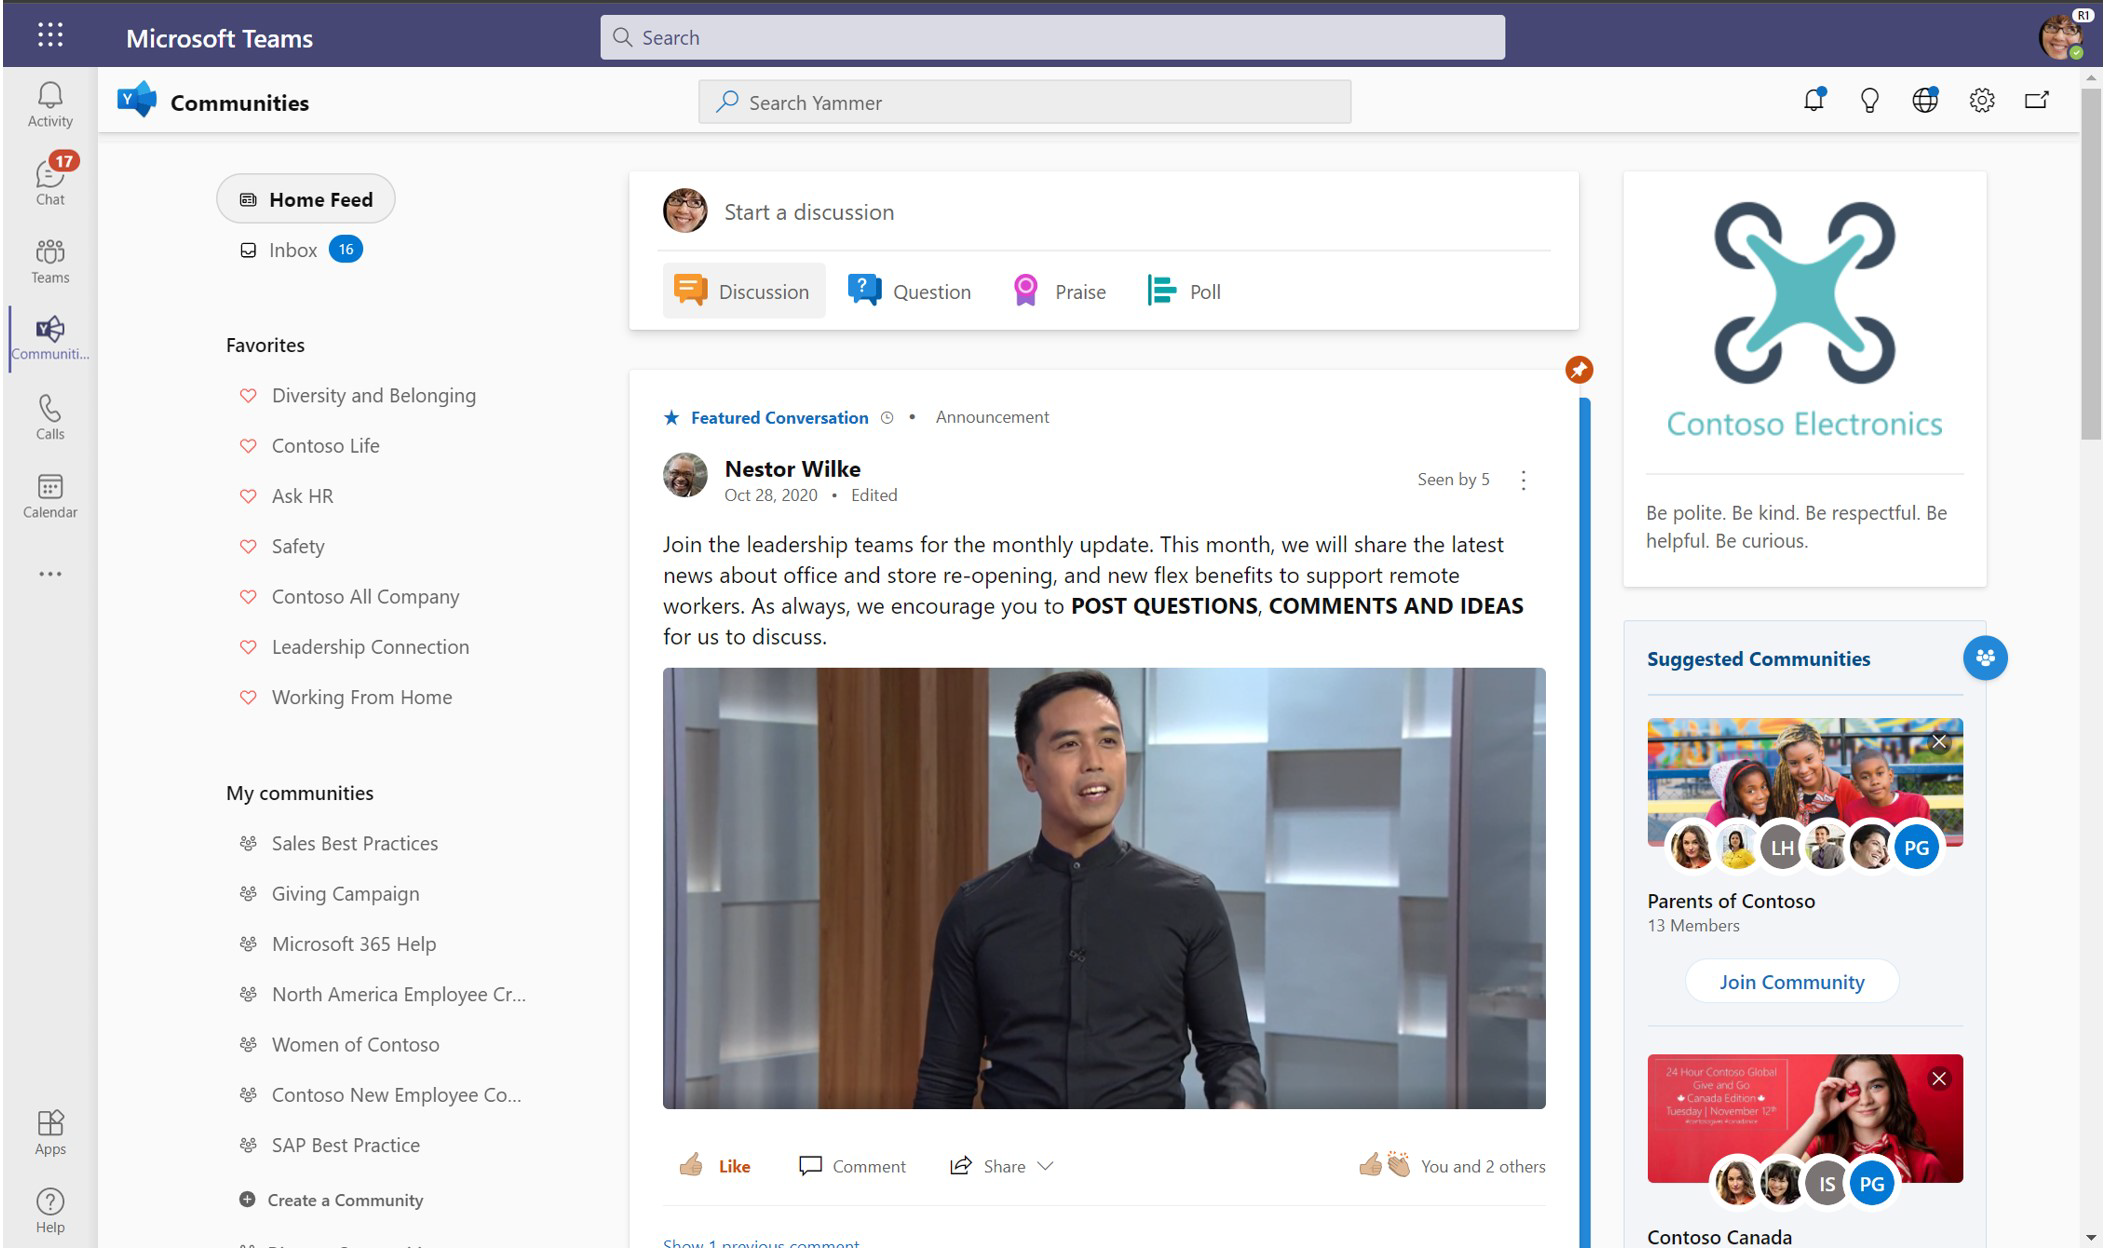 Screenshot showing the full view of the Yammer communities app in Teams